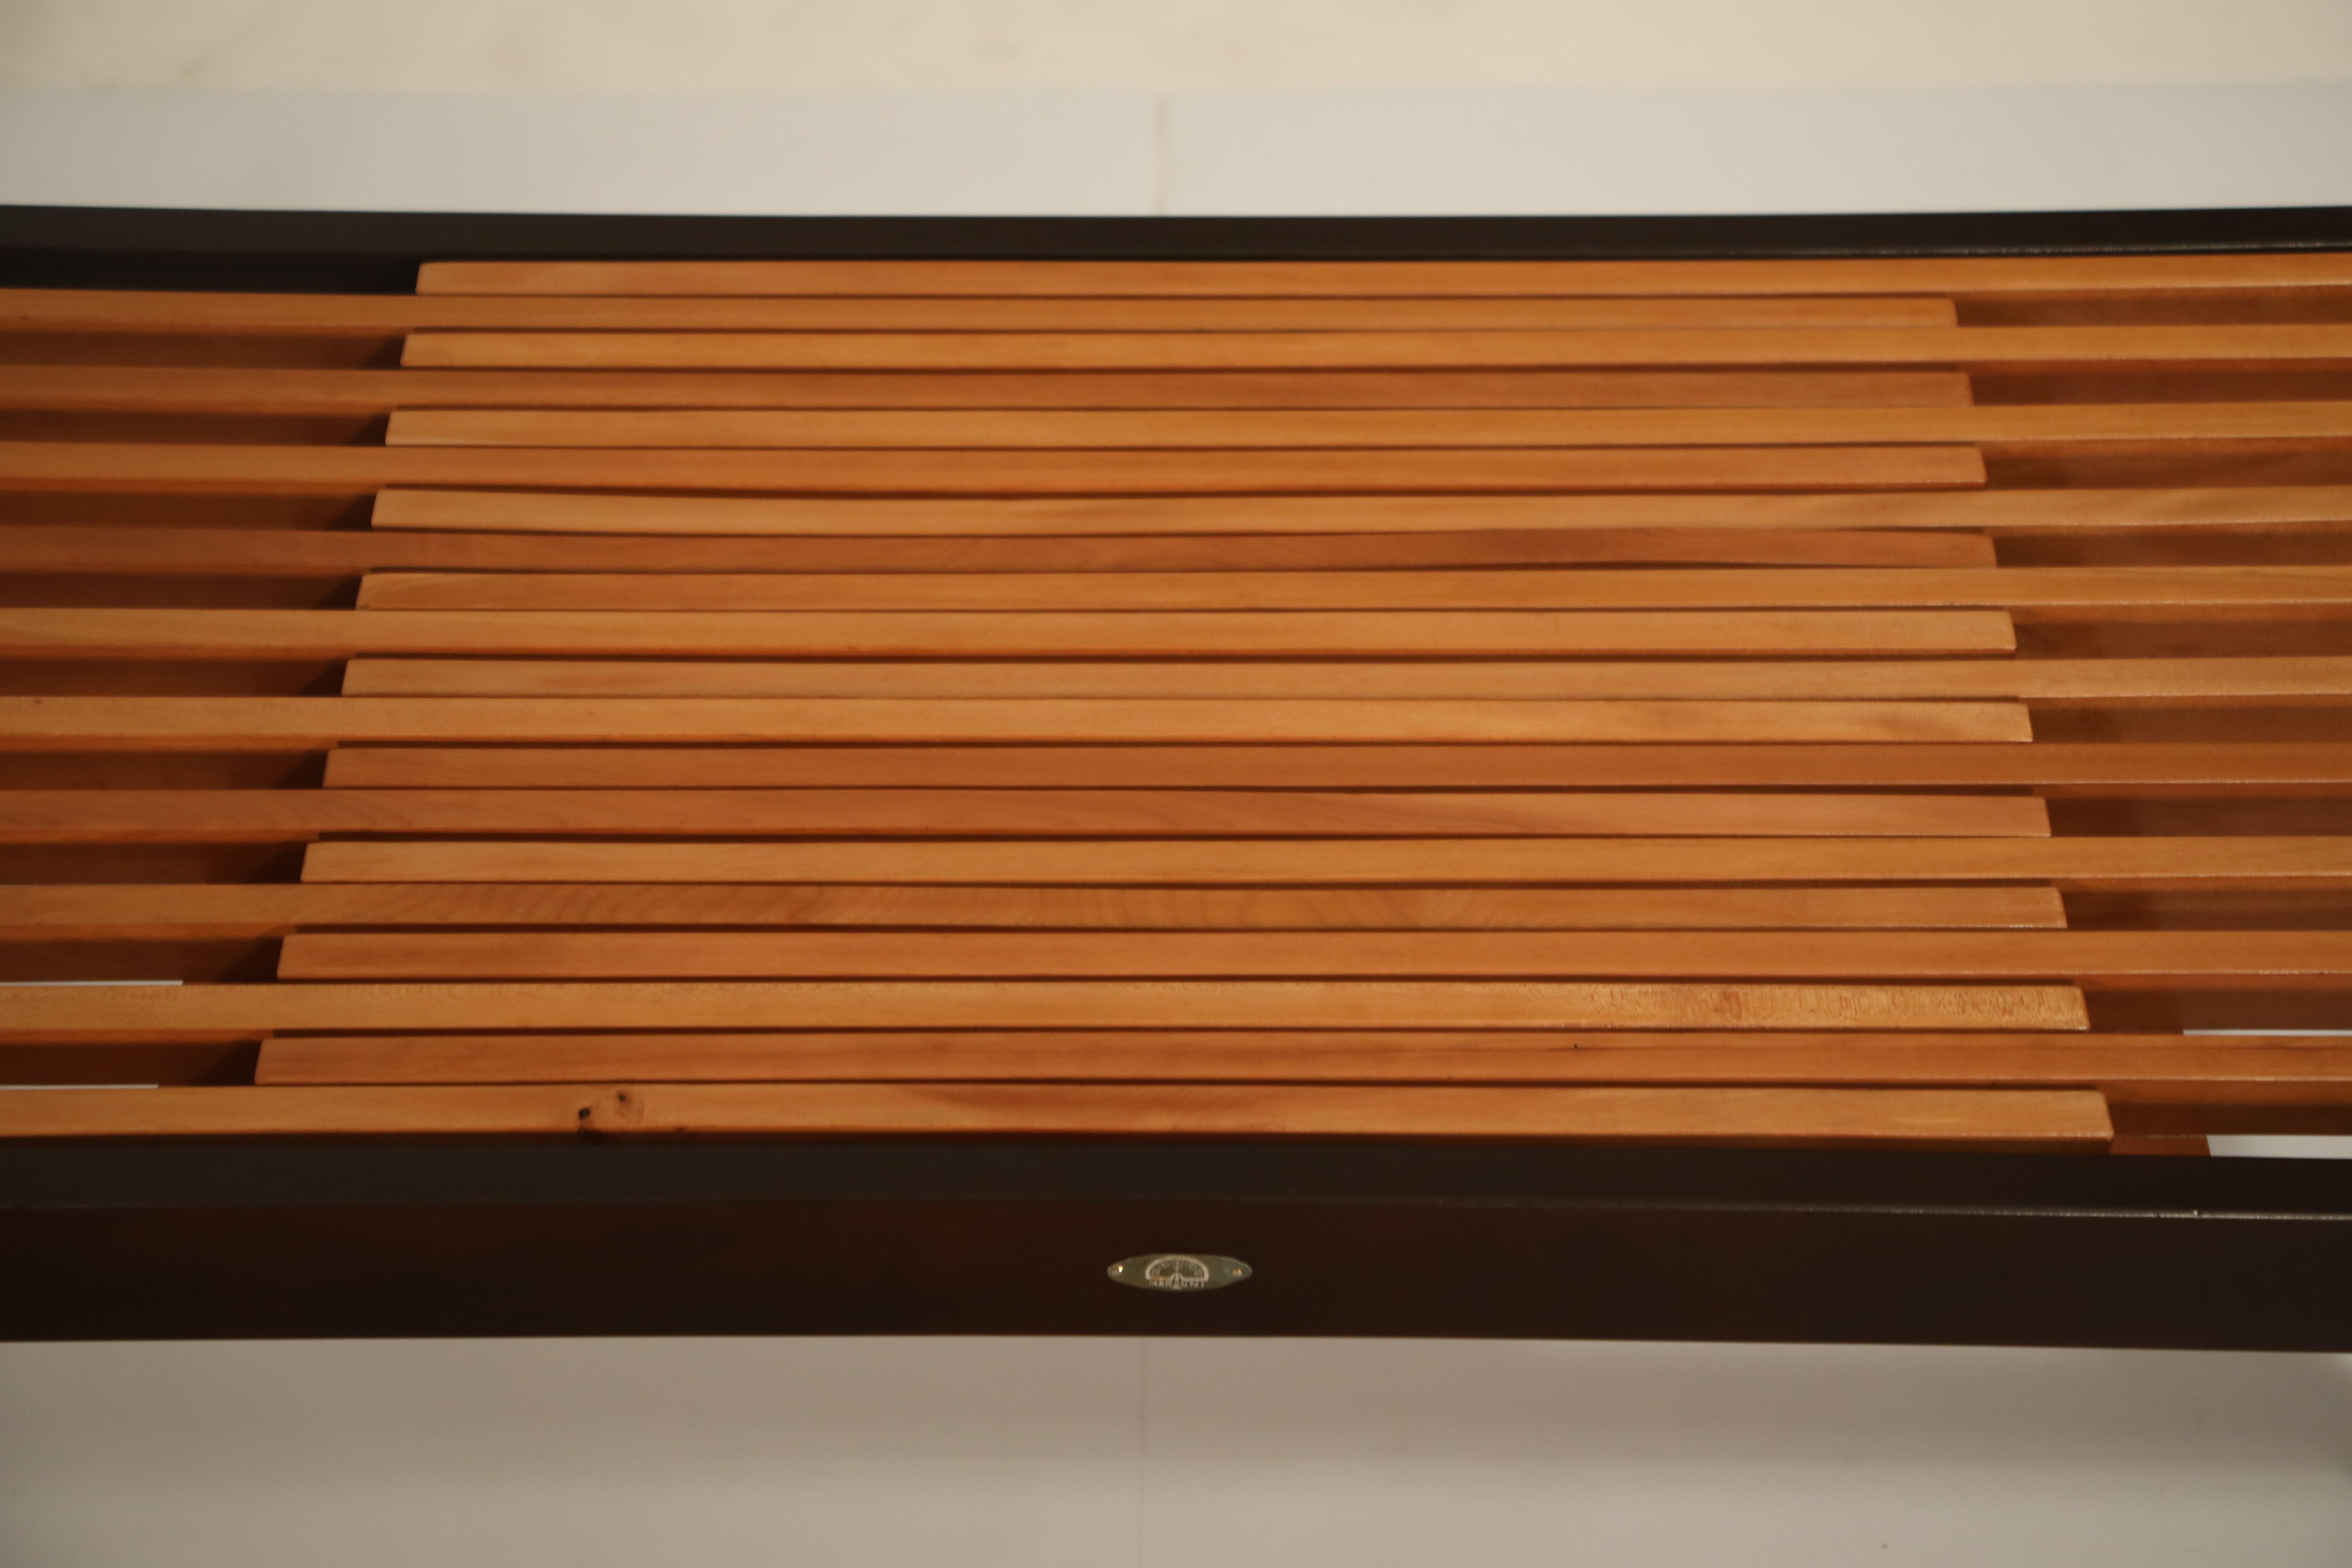 Extendable Slatted Wood Bench or Coffee Table by Maruni, 1950s Hiroshima Japan 5